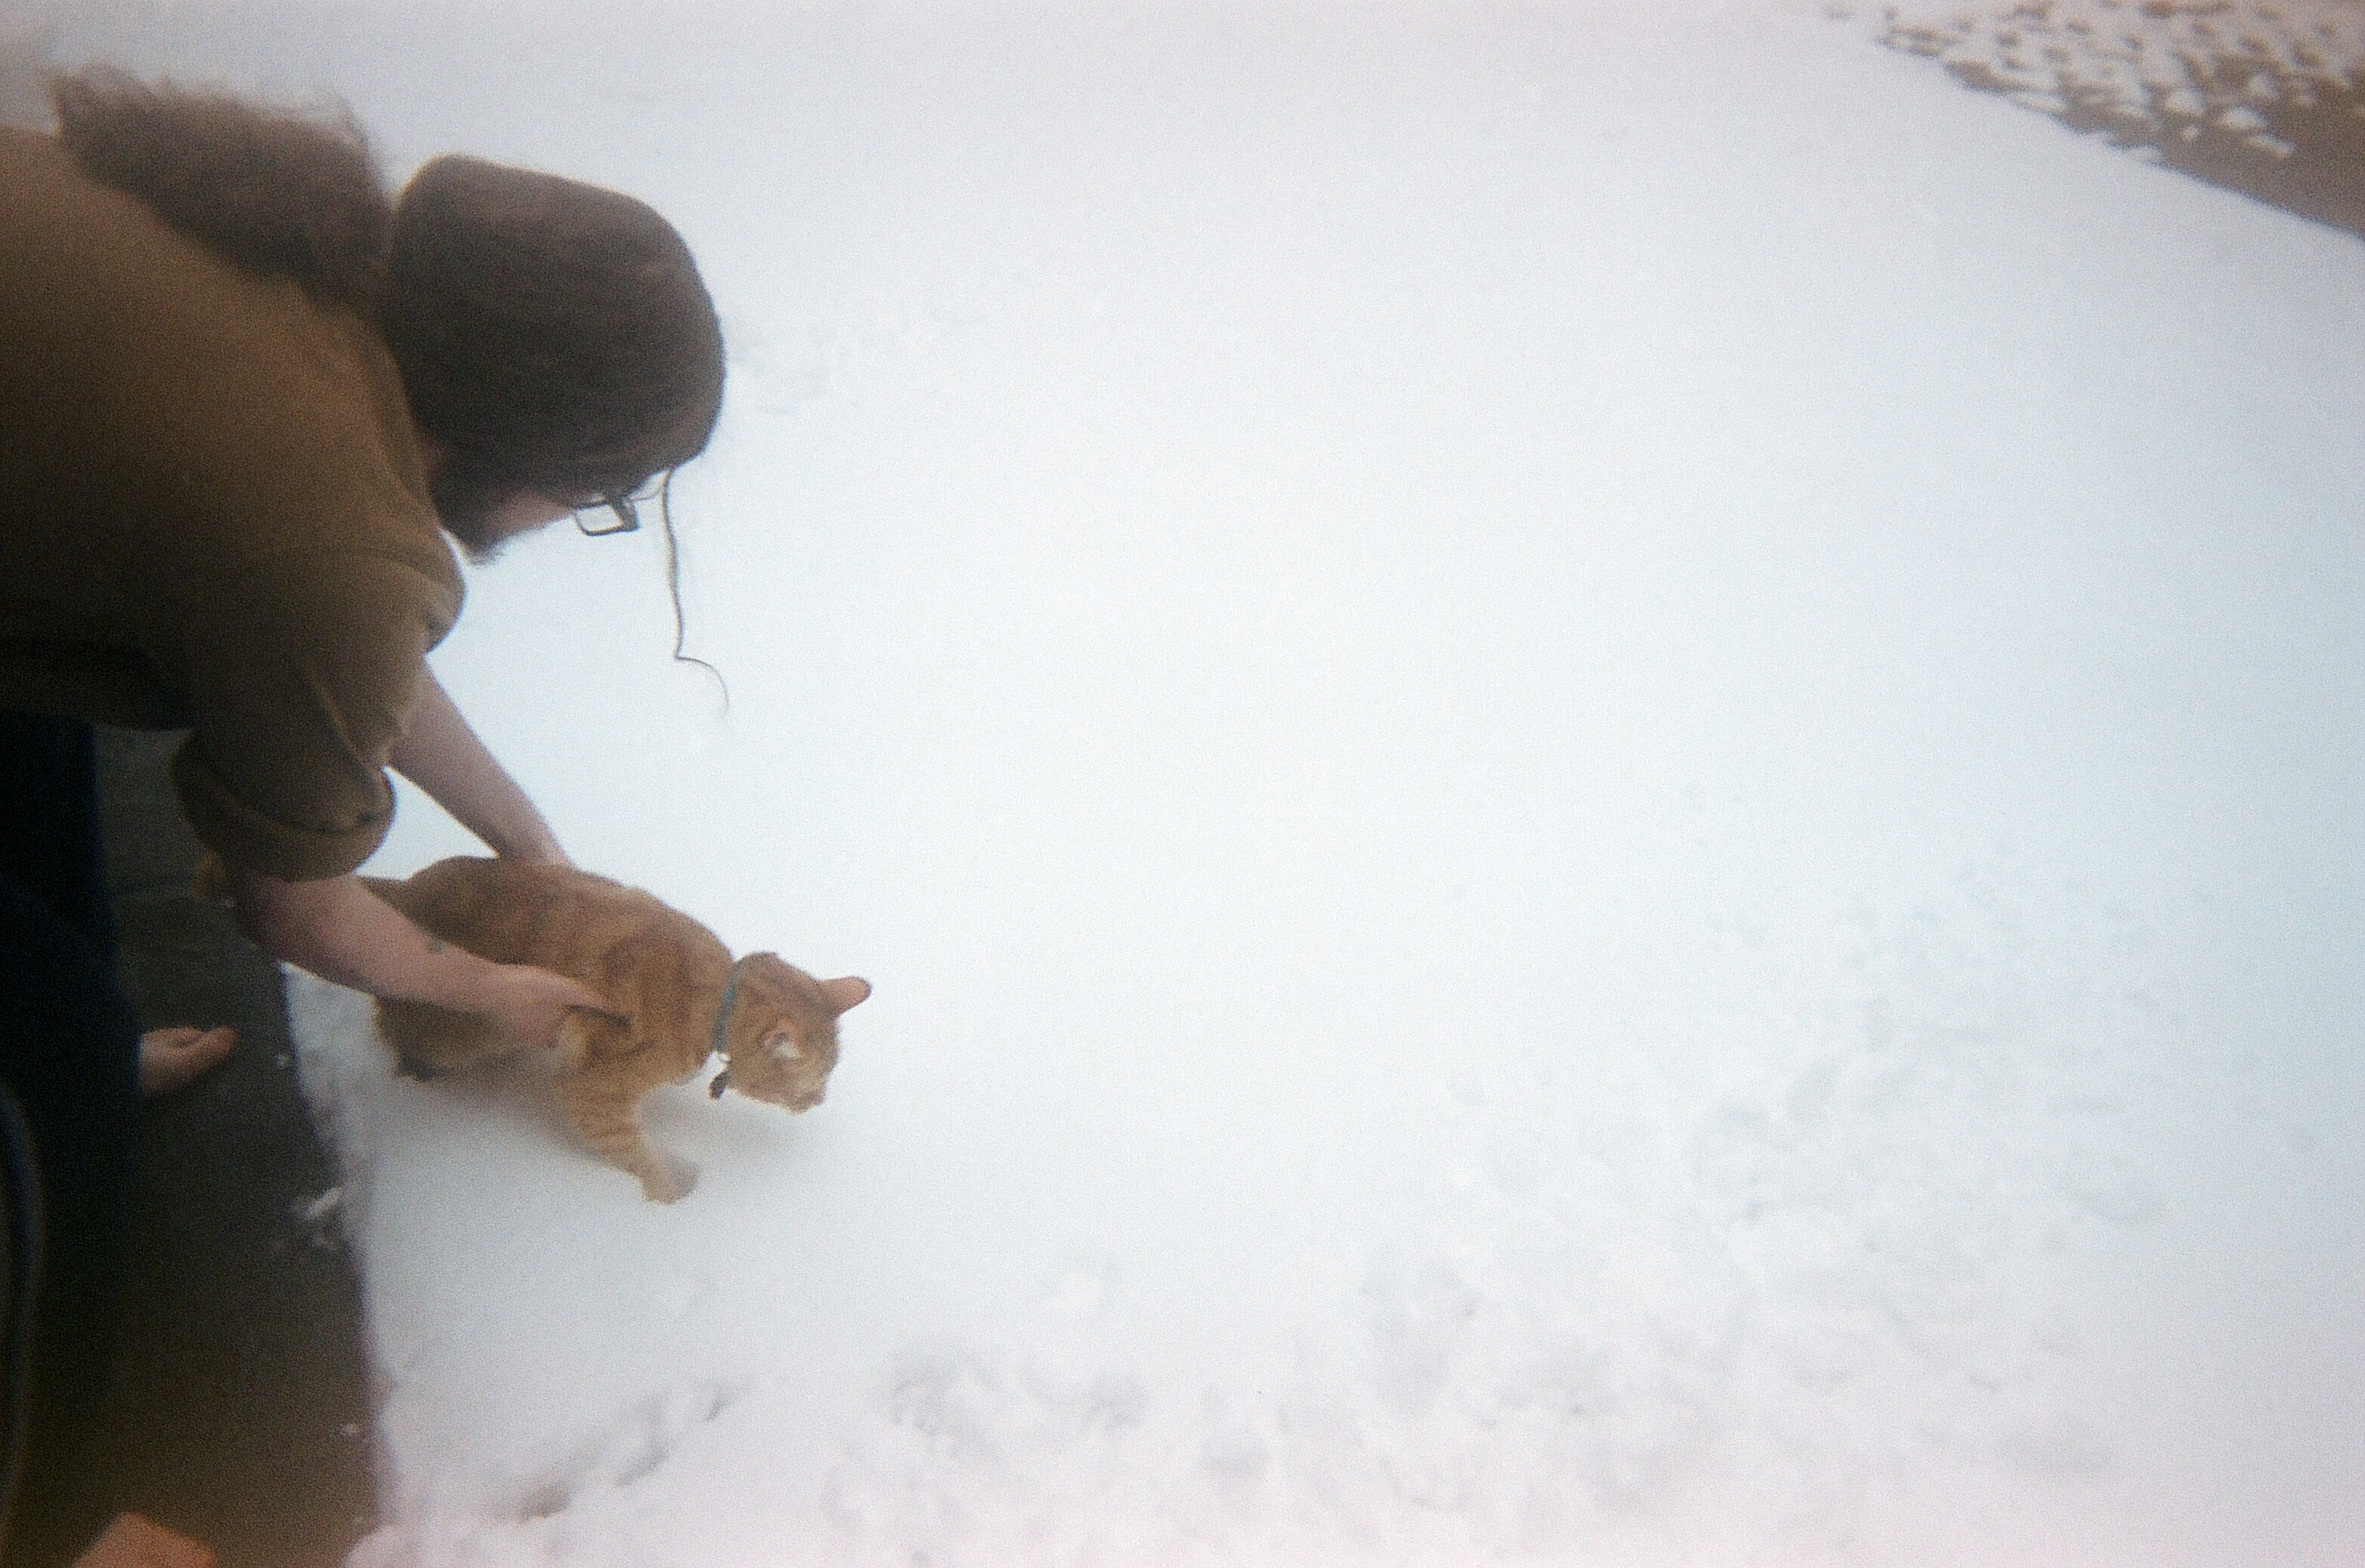 A white man with long brown hair in a loose pony tail sets down a skinny orange tabby into the snow-covered ground.